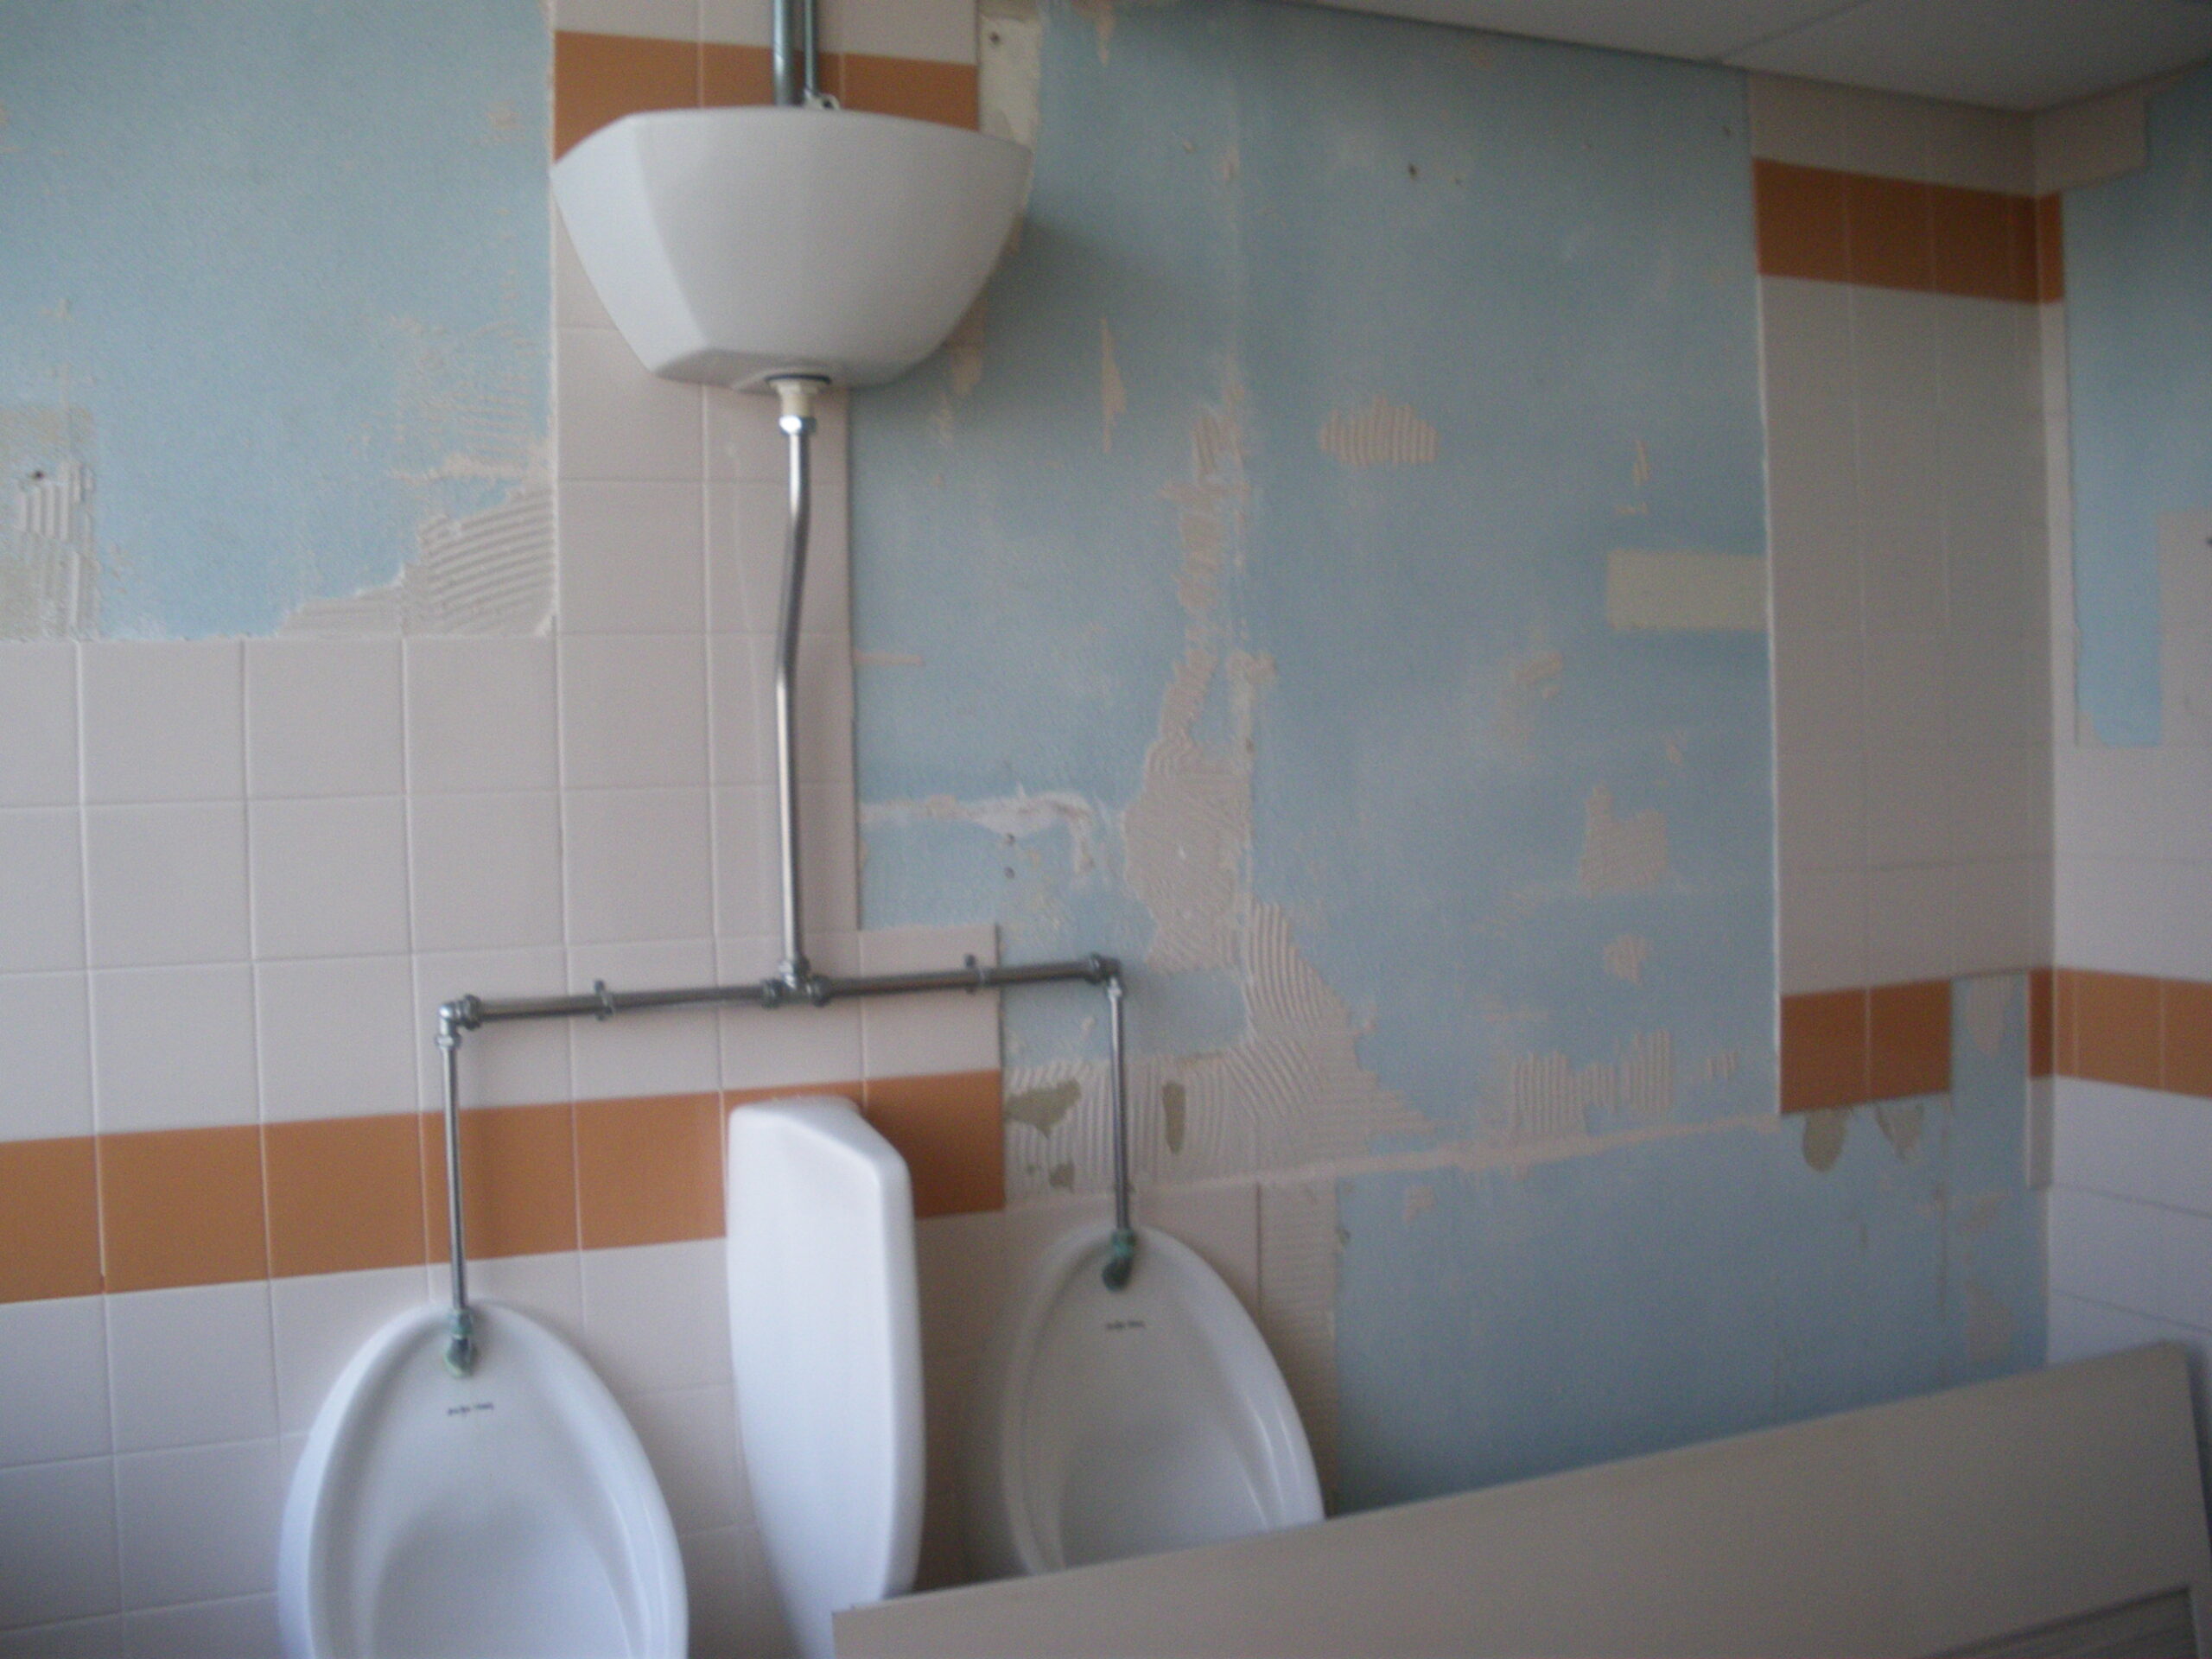 One of the gents' WCs with damaged tiles, 13 Sep 2011